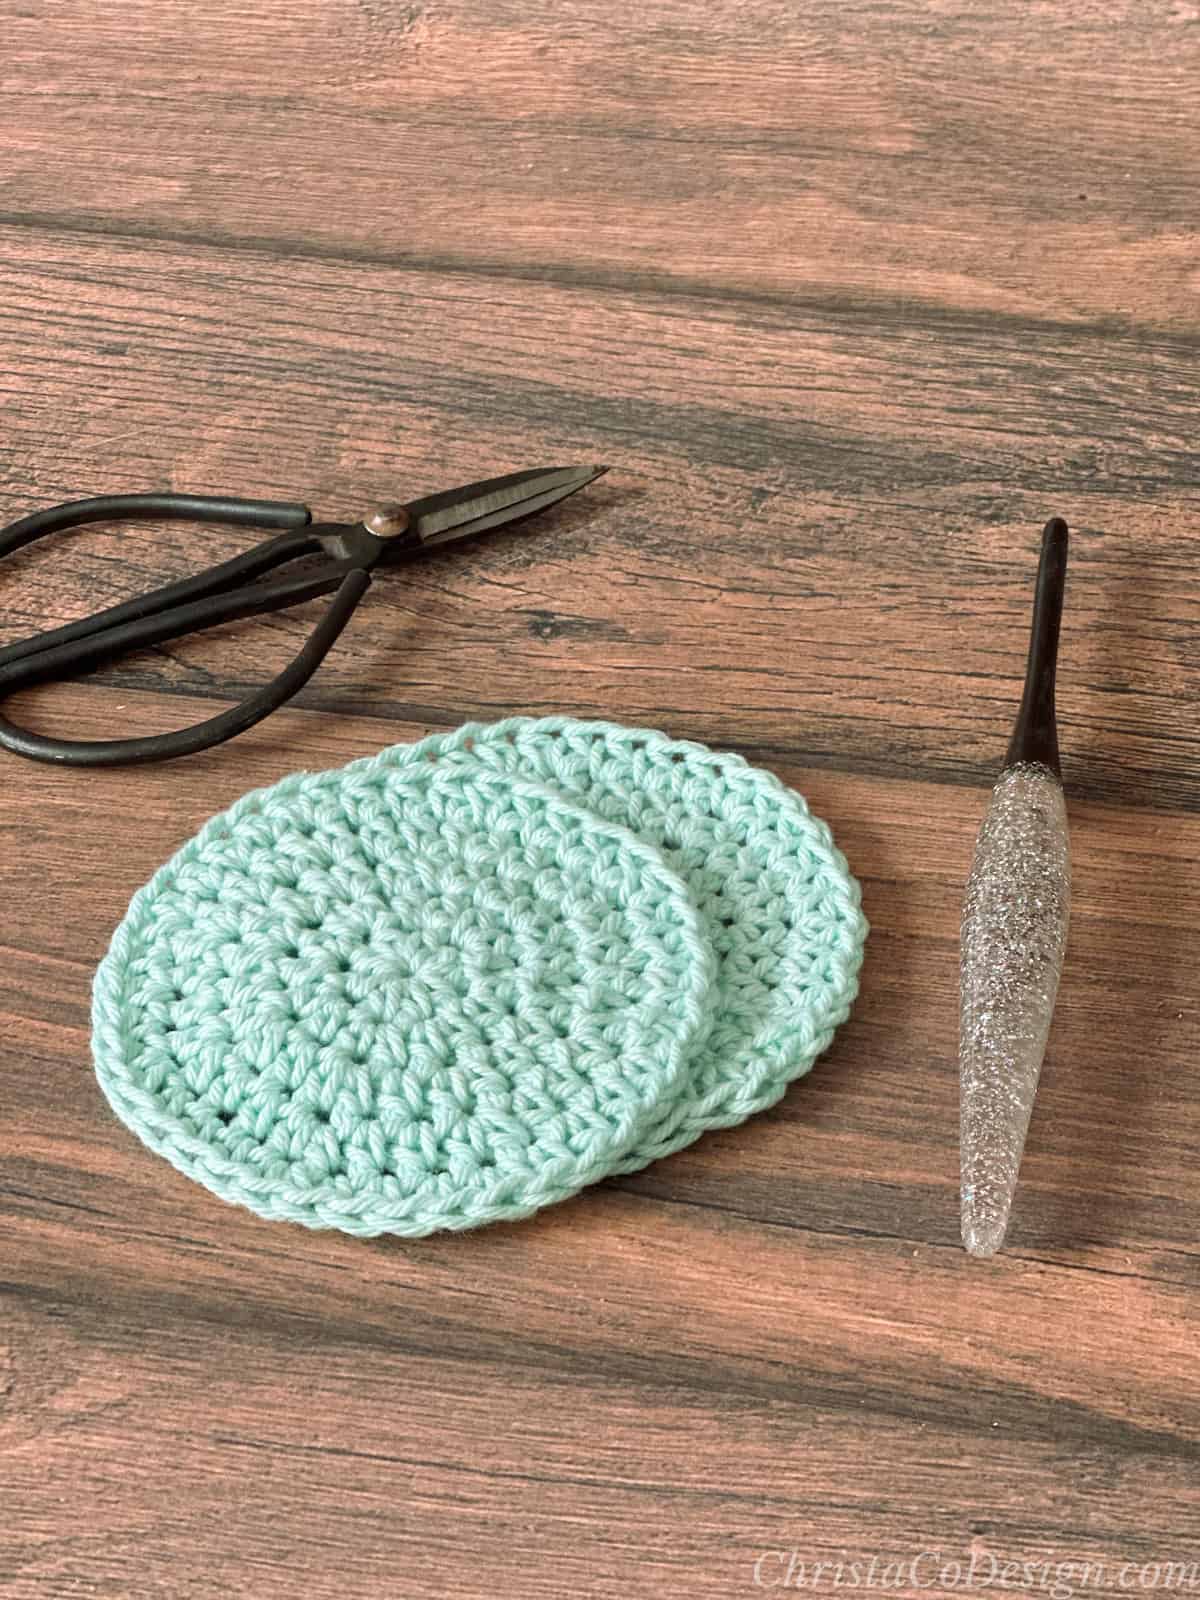 Two mint colored round crochet scrubbiest next to scissors and crochet hook.